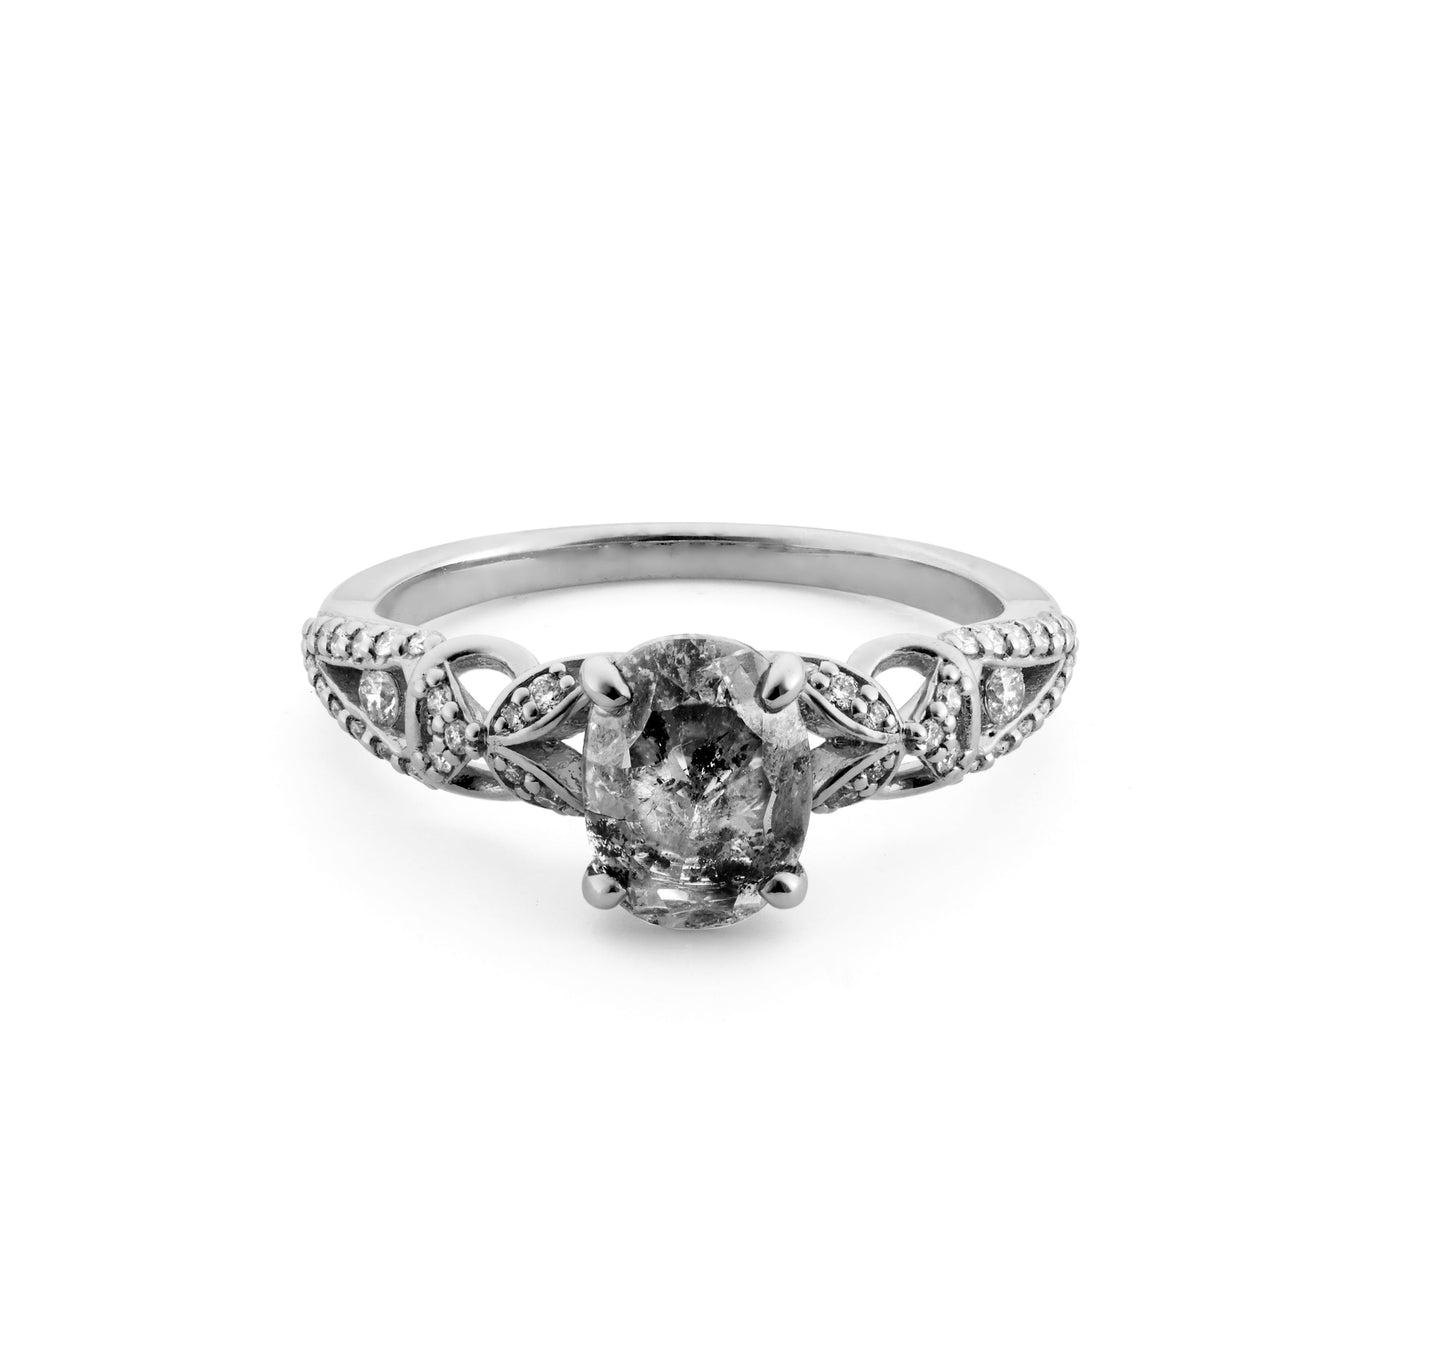 The Viviana Ring in 14k white gold with a salt and pepper diamond.